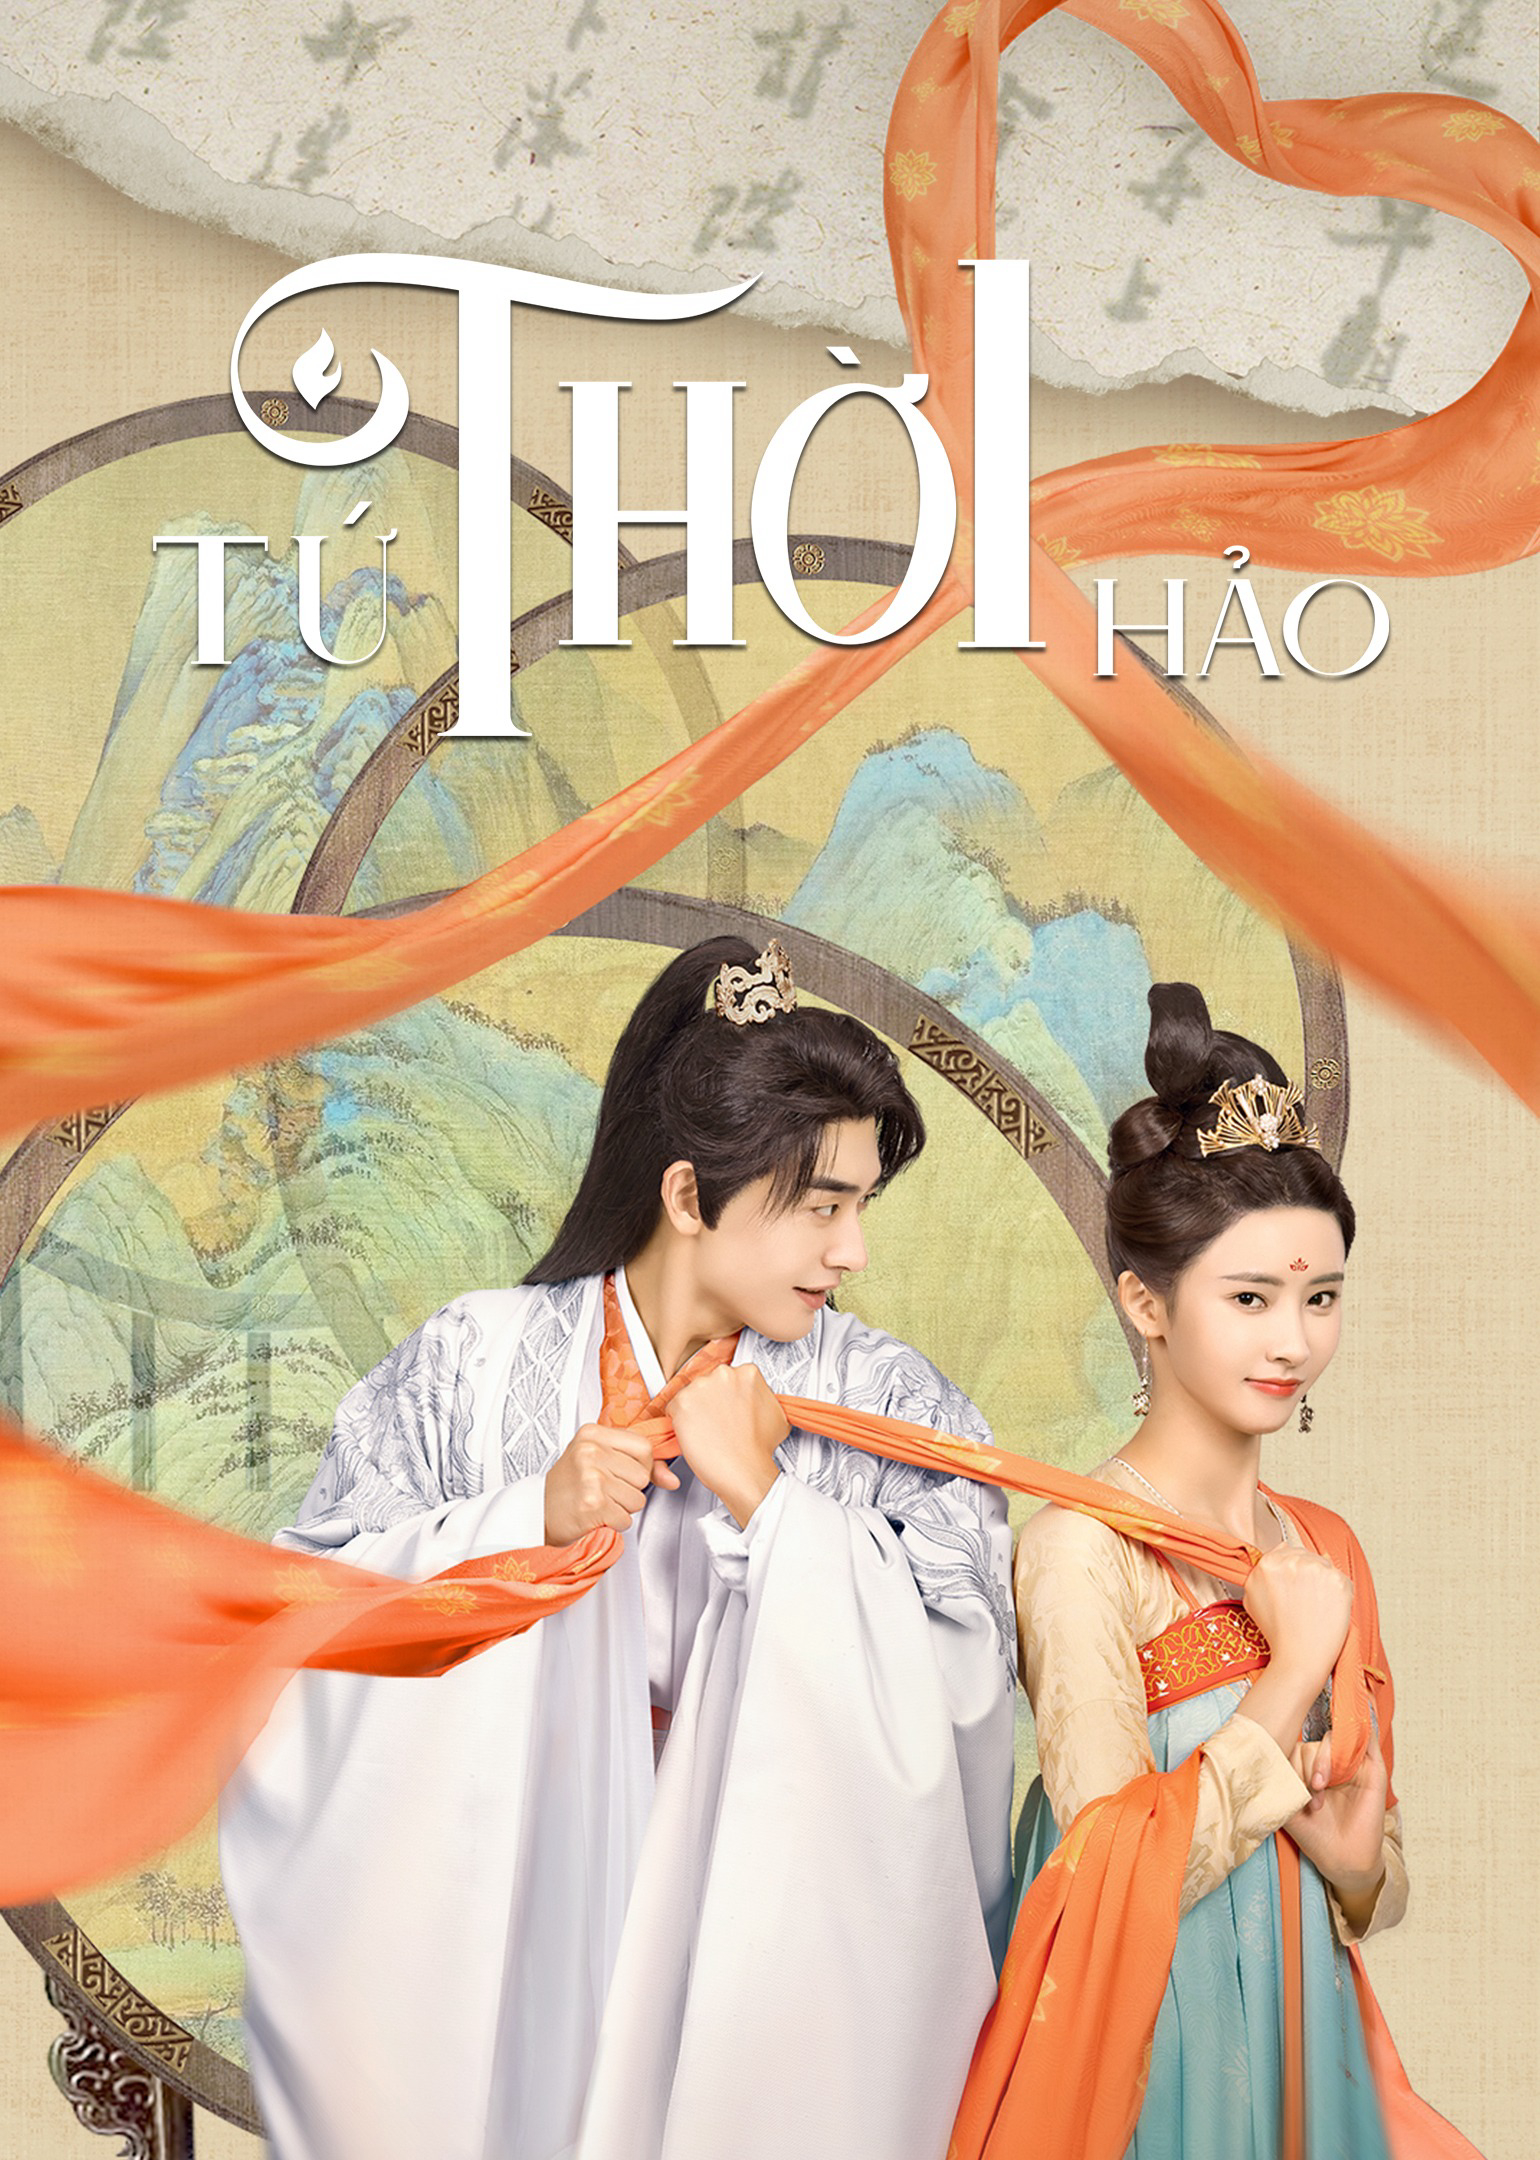 Poster Phim Tứ Thời Hảo (Yes, Her Majesty)